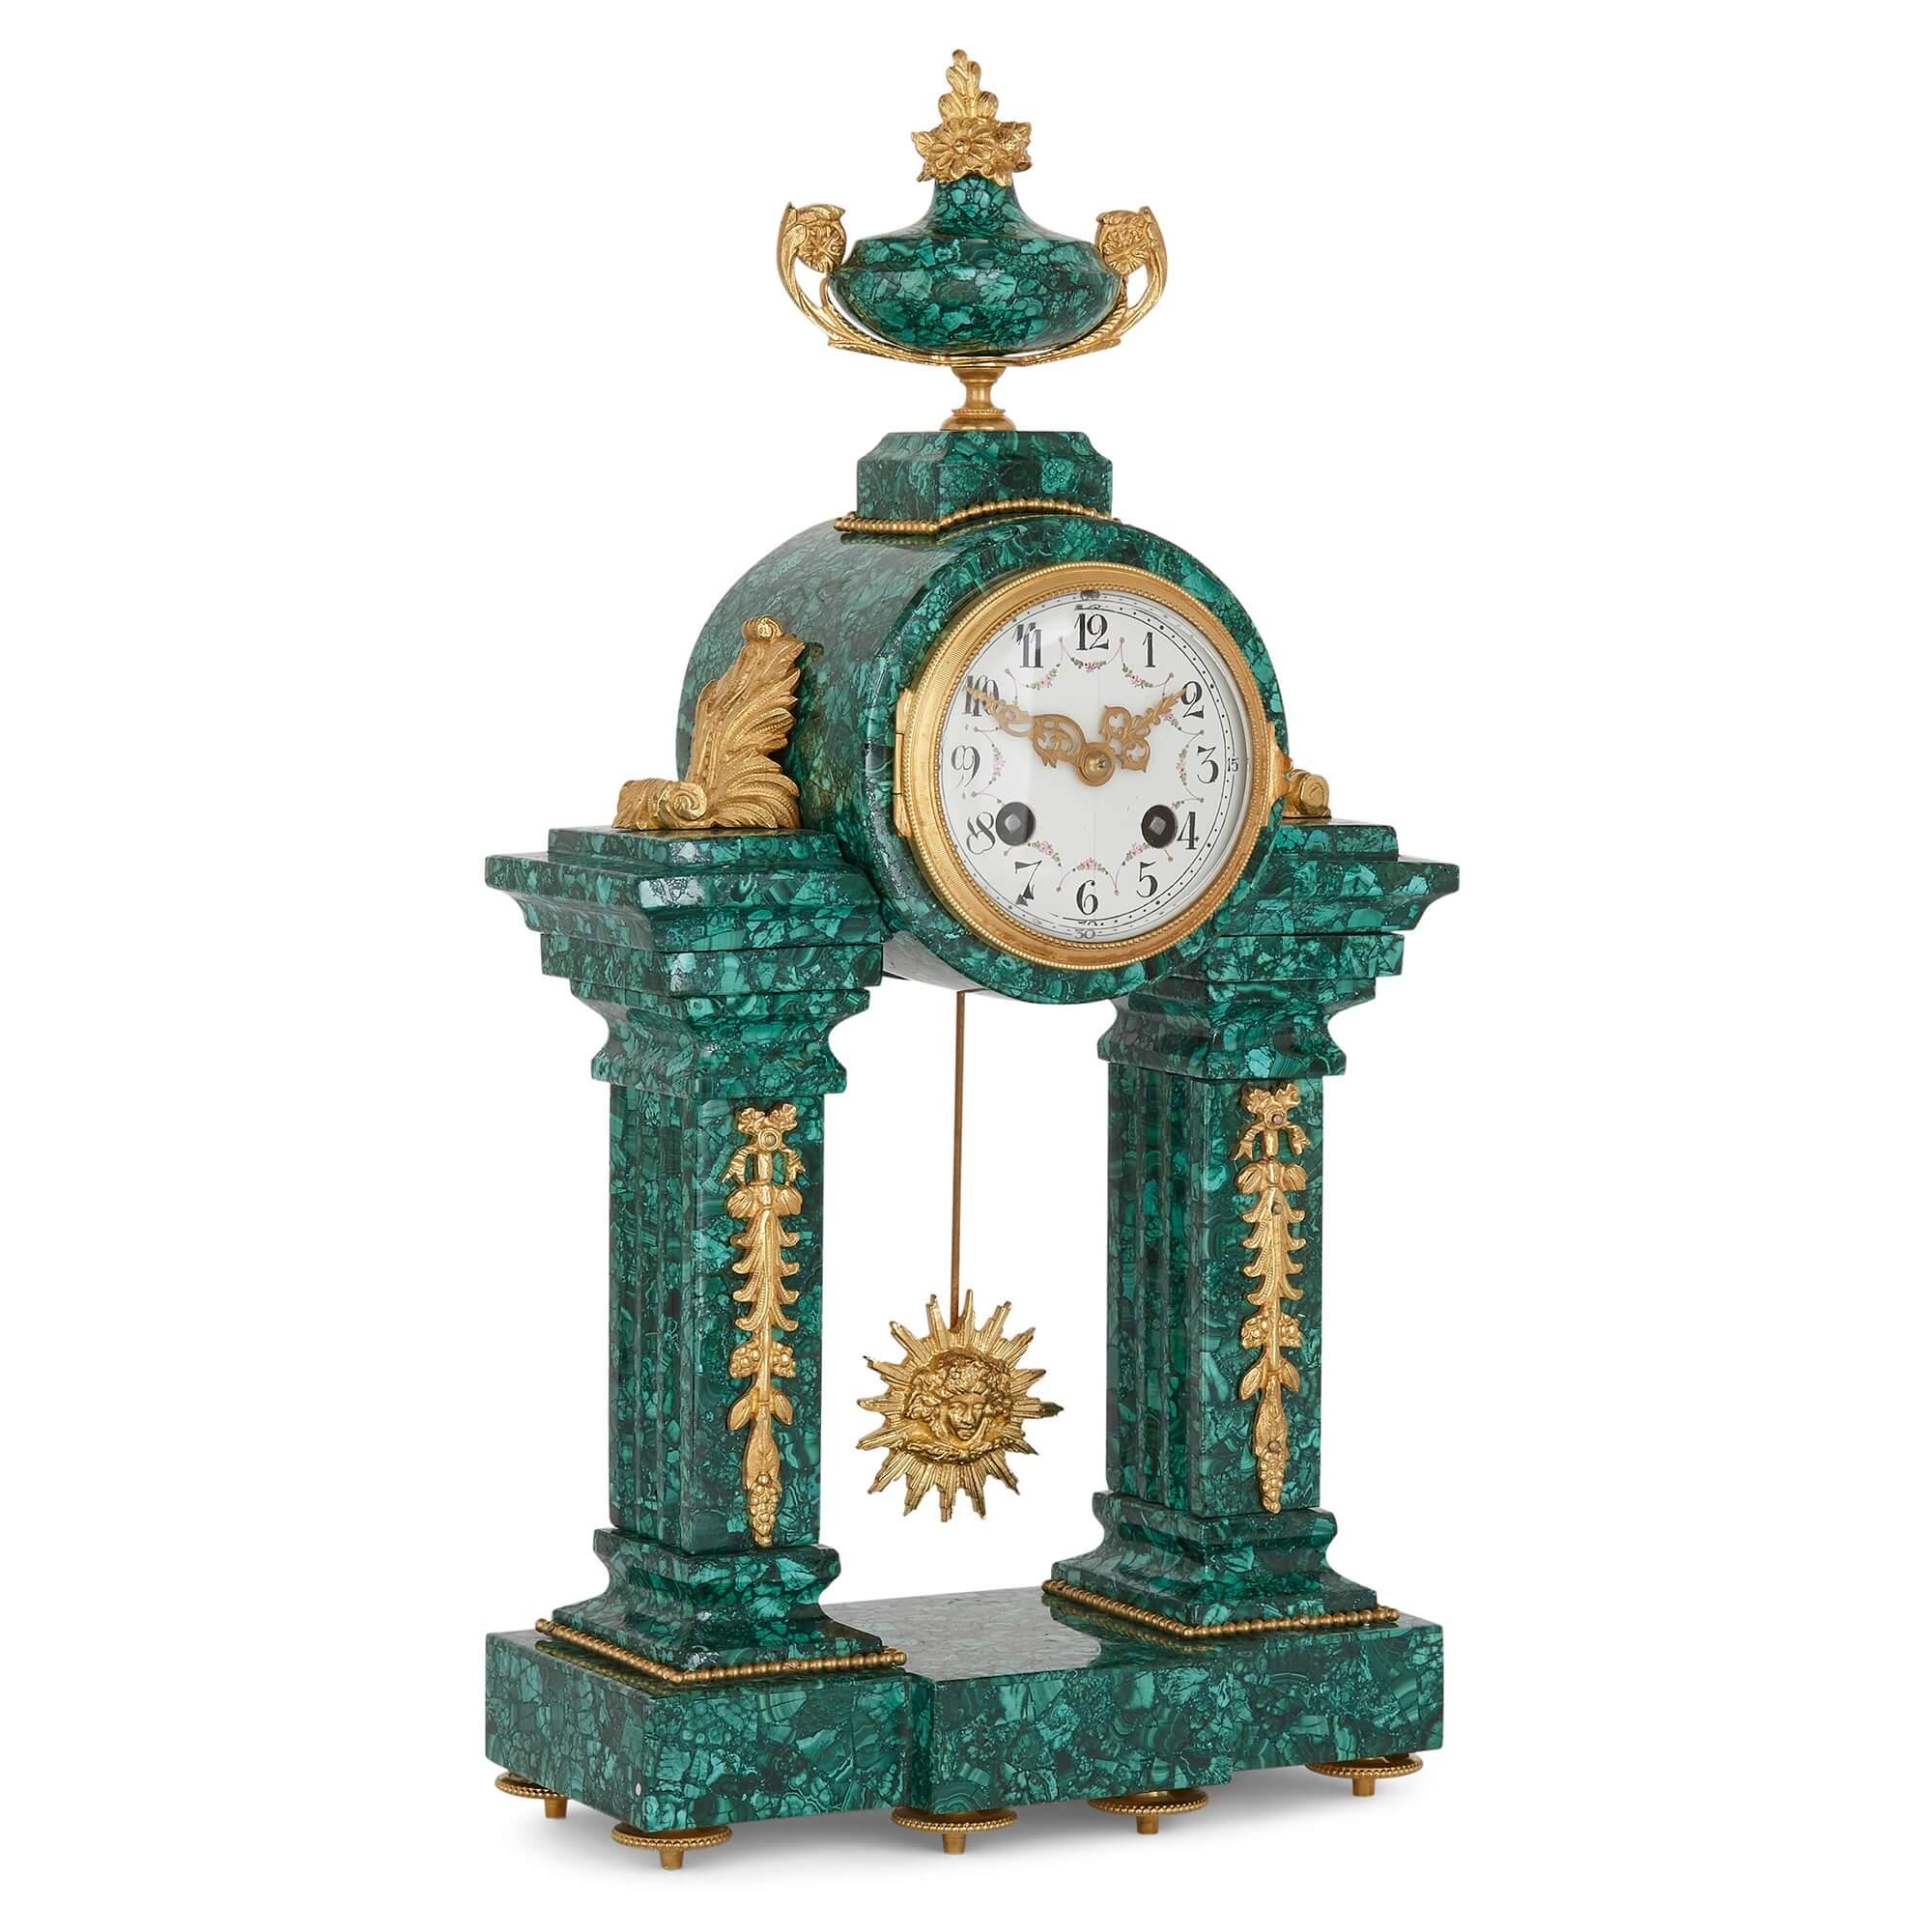 French Neoclassical style malachite and gilt bronze mantel clock
French, late 19th Century
Measures: height 42cm, width 22cm, depth 11cm

This fine clock is crafted in the Louis XVI Neoclassical style from malachite and gilt bronze—with the